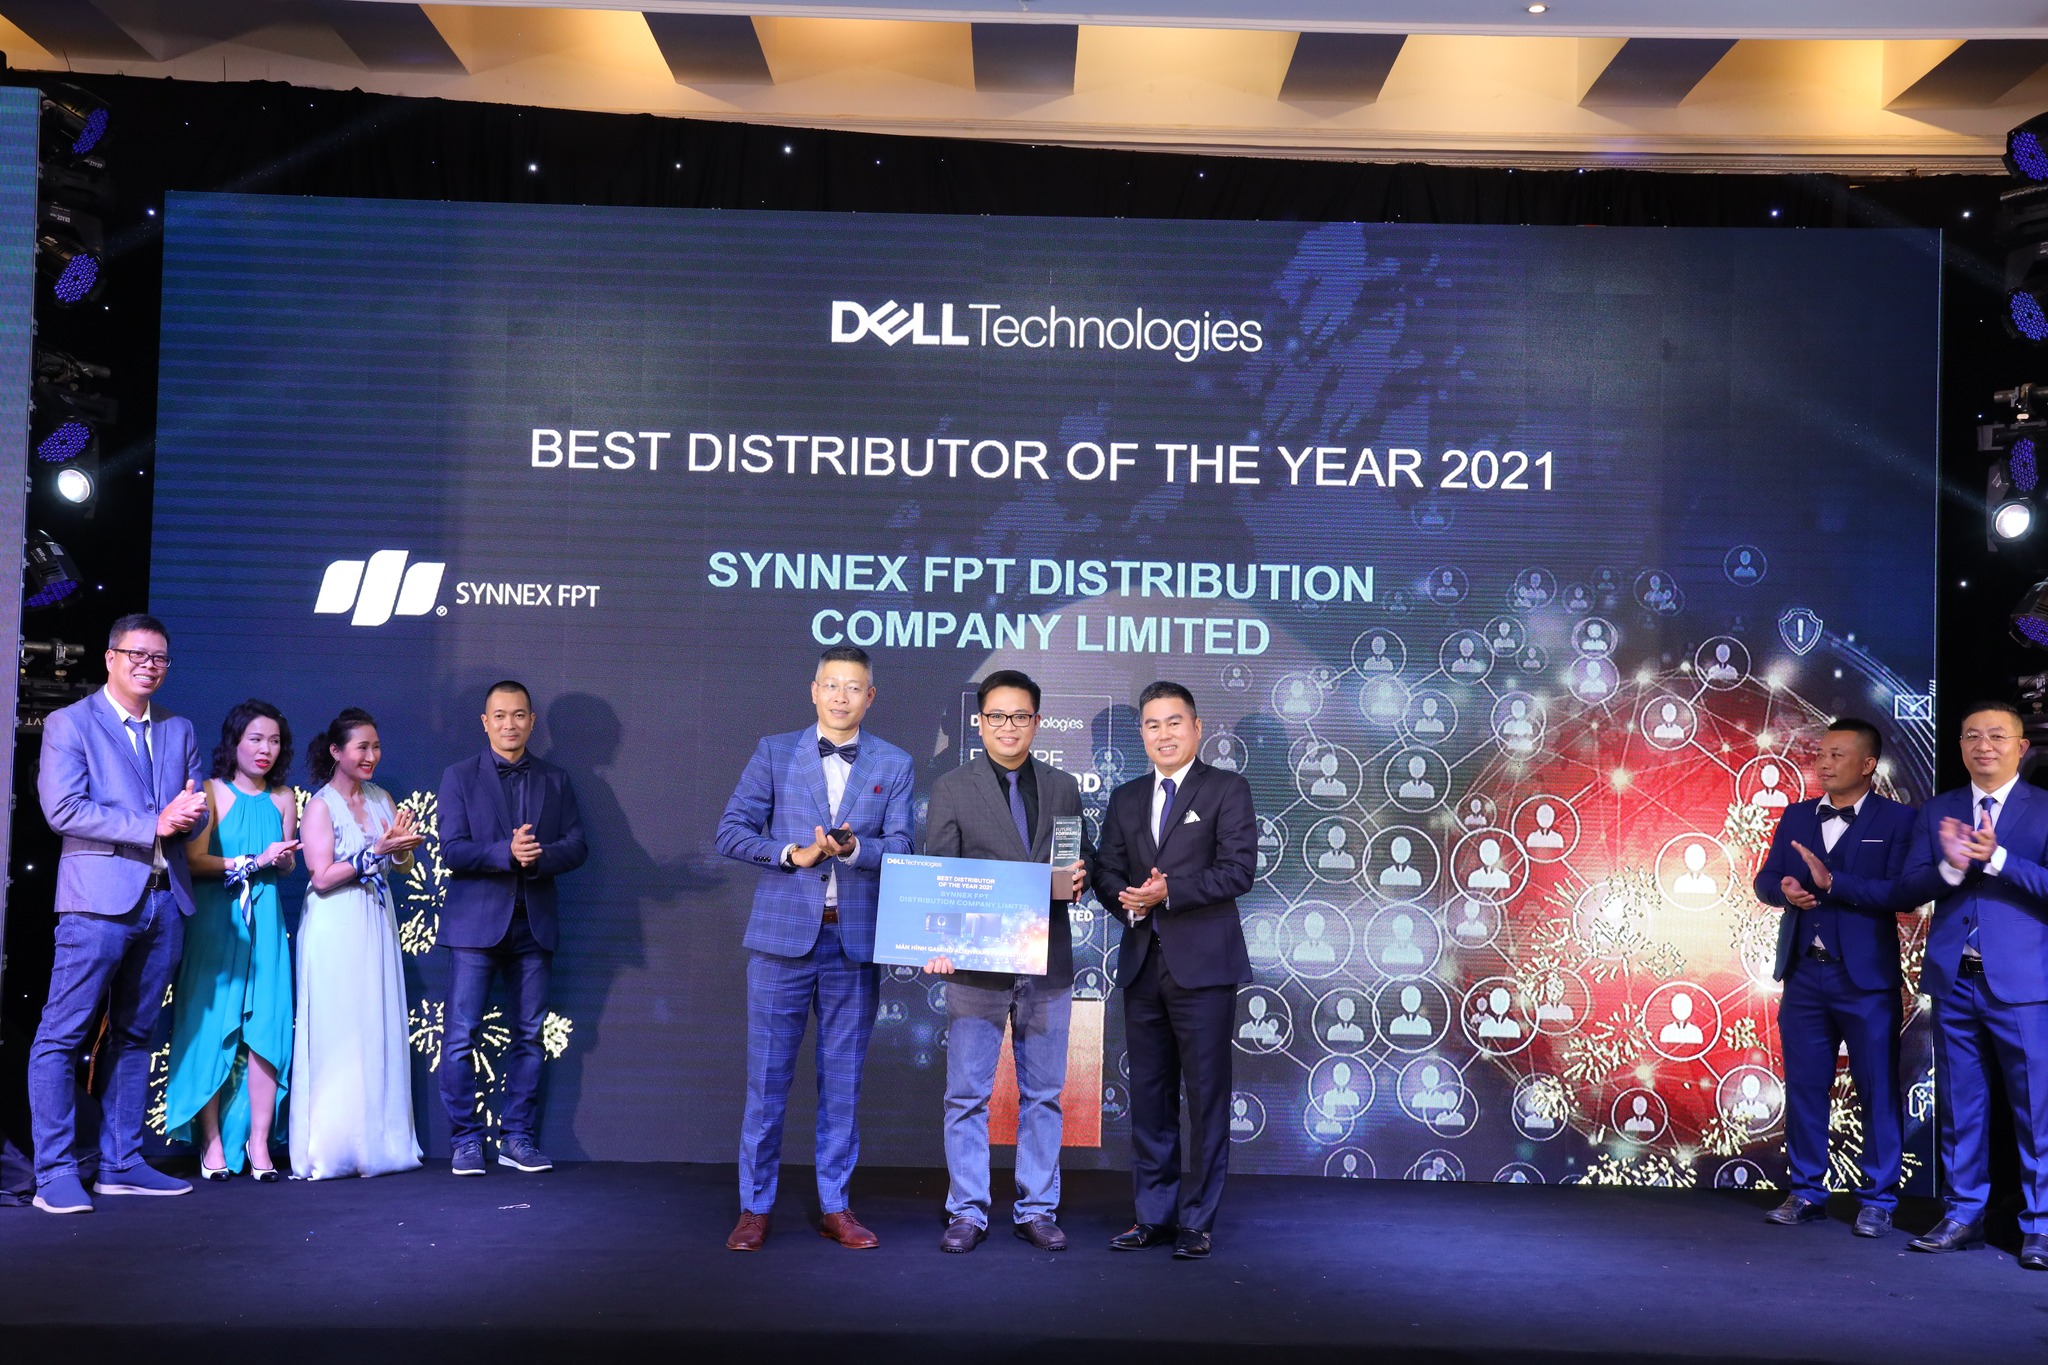 Synnex FPT is the Best Distributor FY22 of Dell Technologies